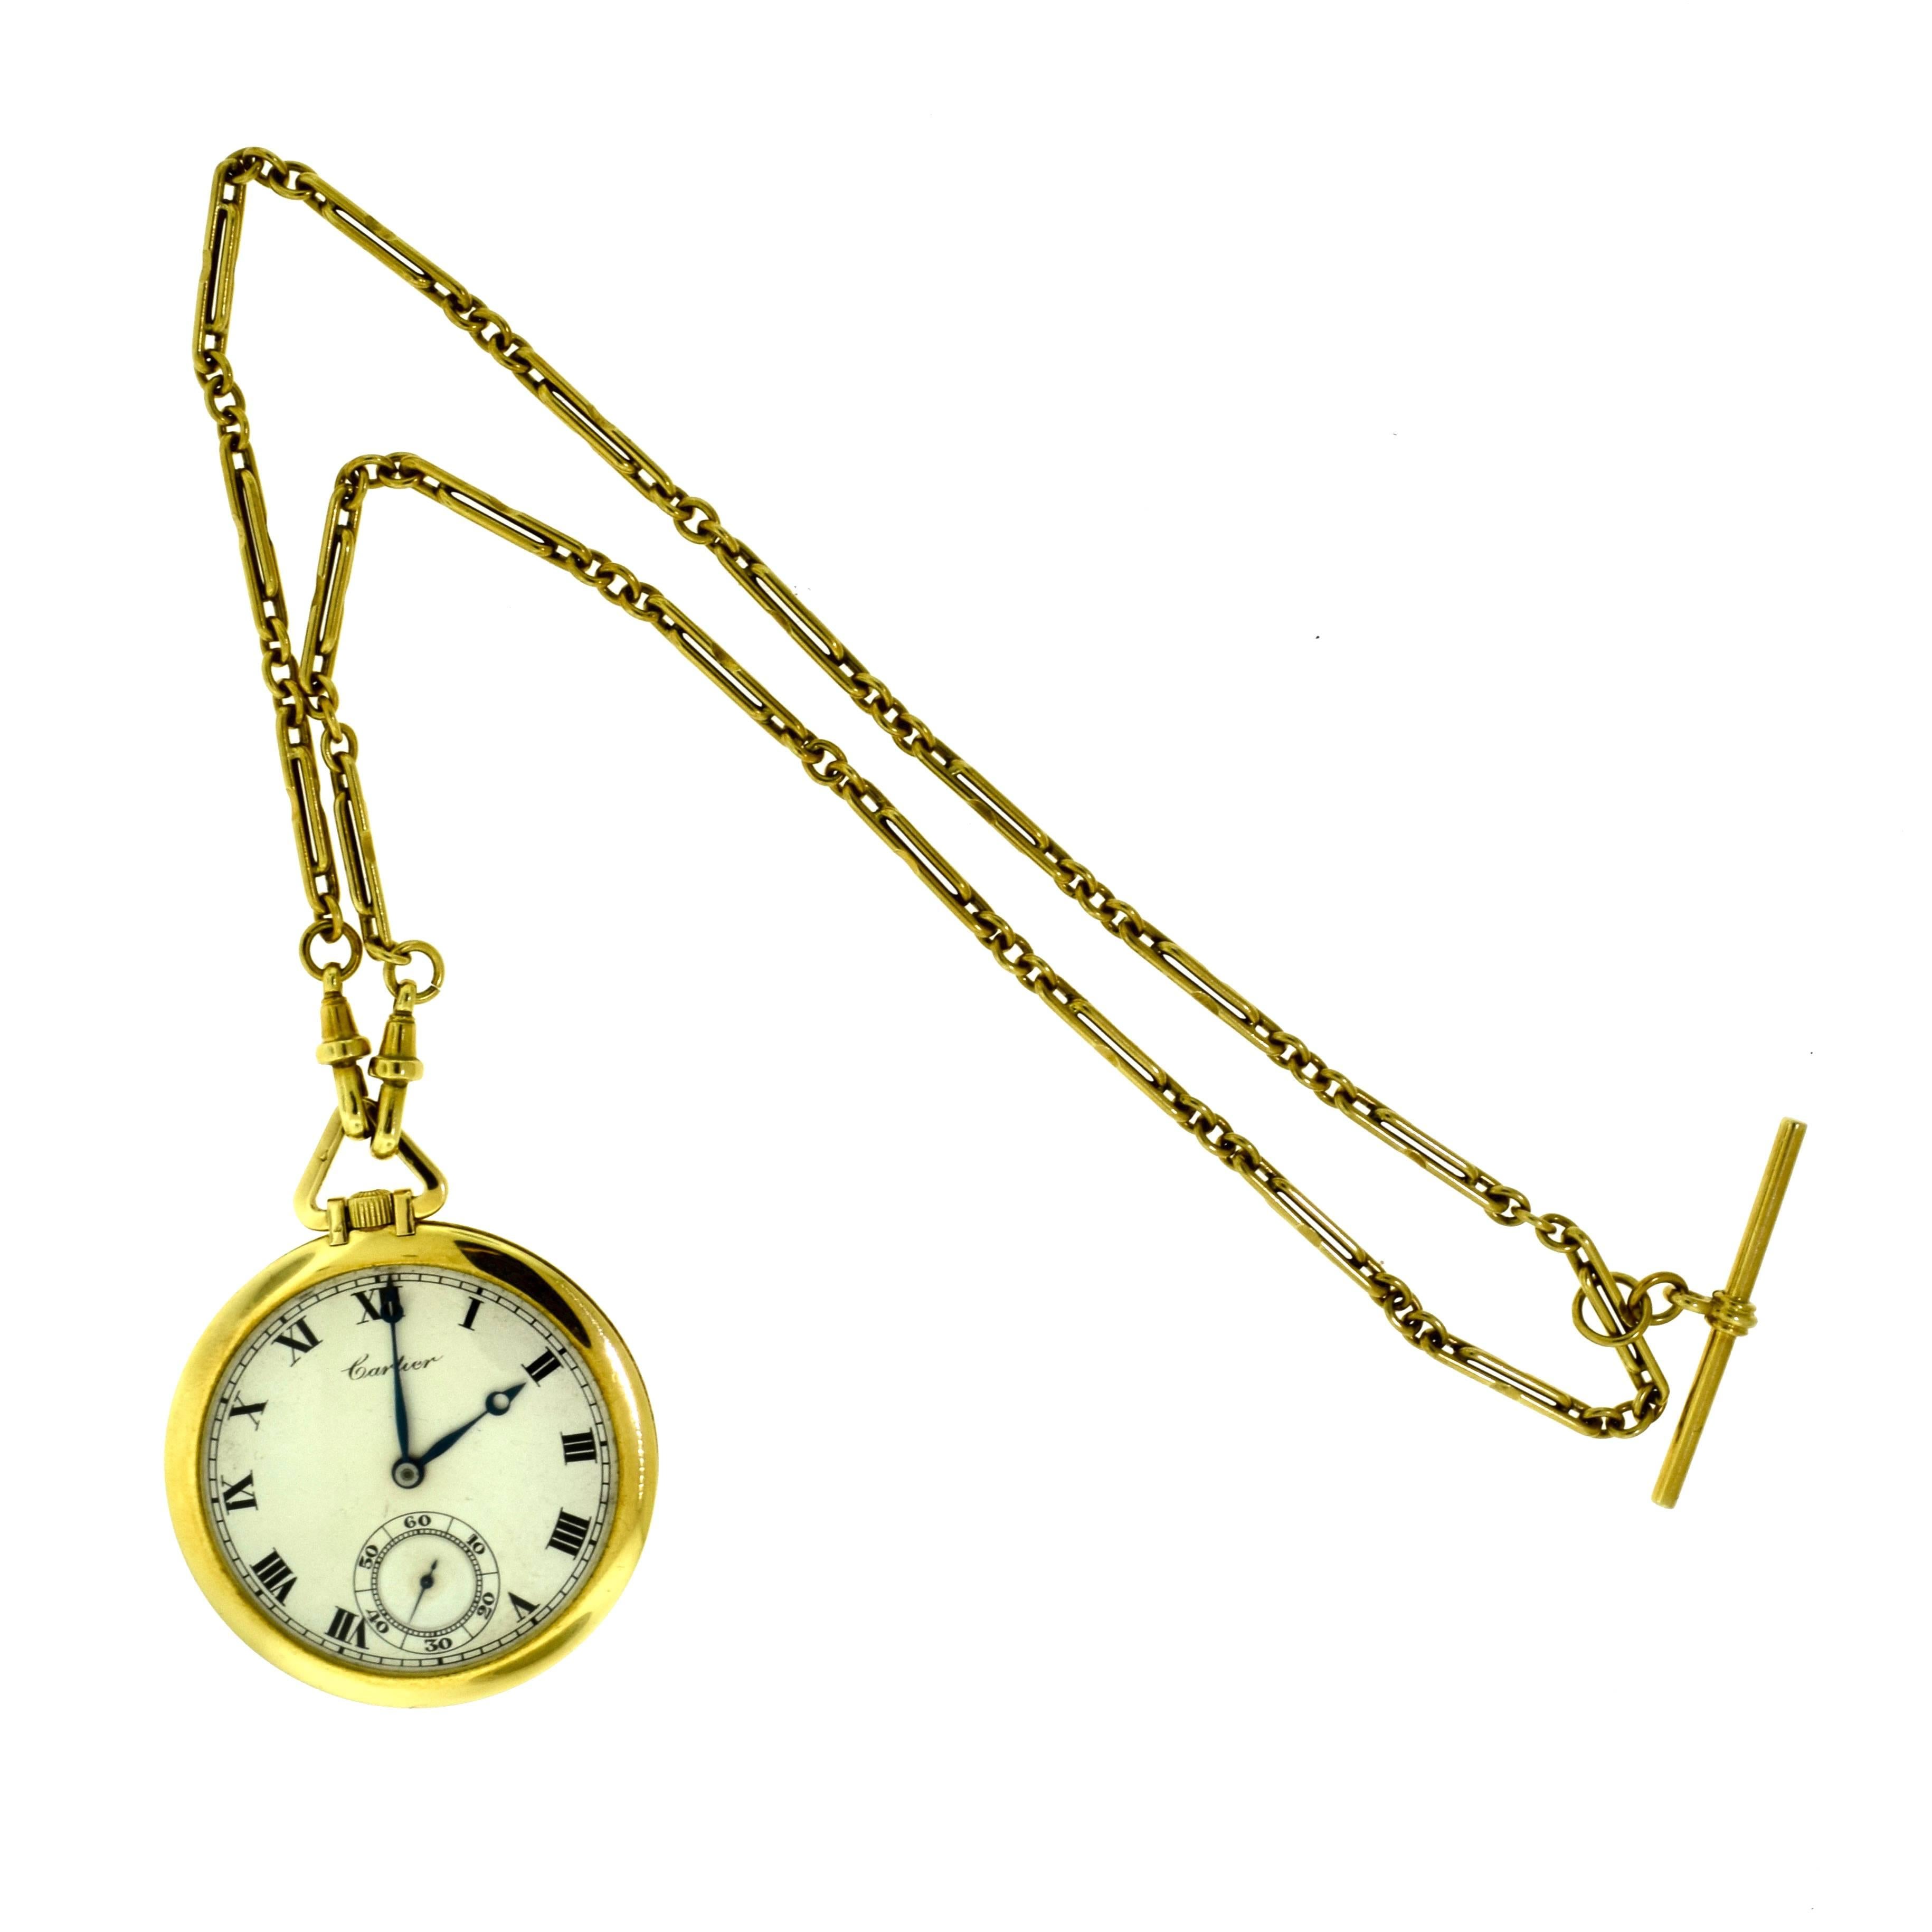 Designer: Cartier
Type: Minute Repeating Pocket Watch
Case Size: 45 mm
Metal: Yellow Gold
Metal Purity: 18k
Total Item Weight (g):  84.3
Chain Length: 19 inches